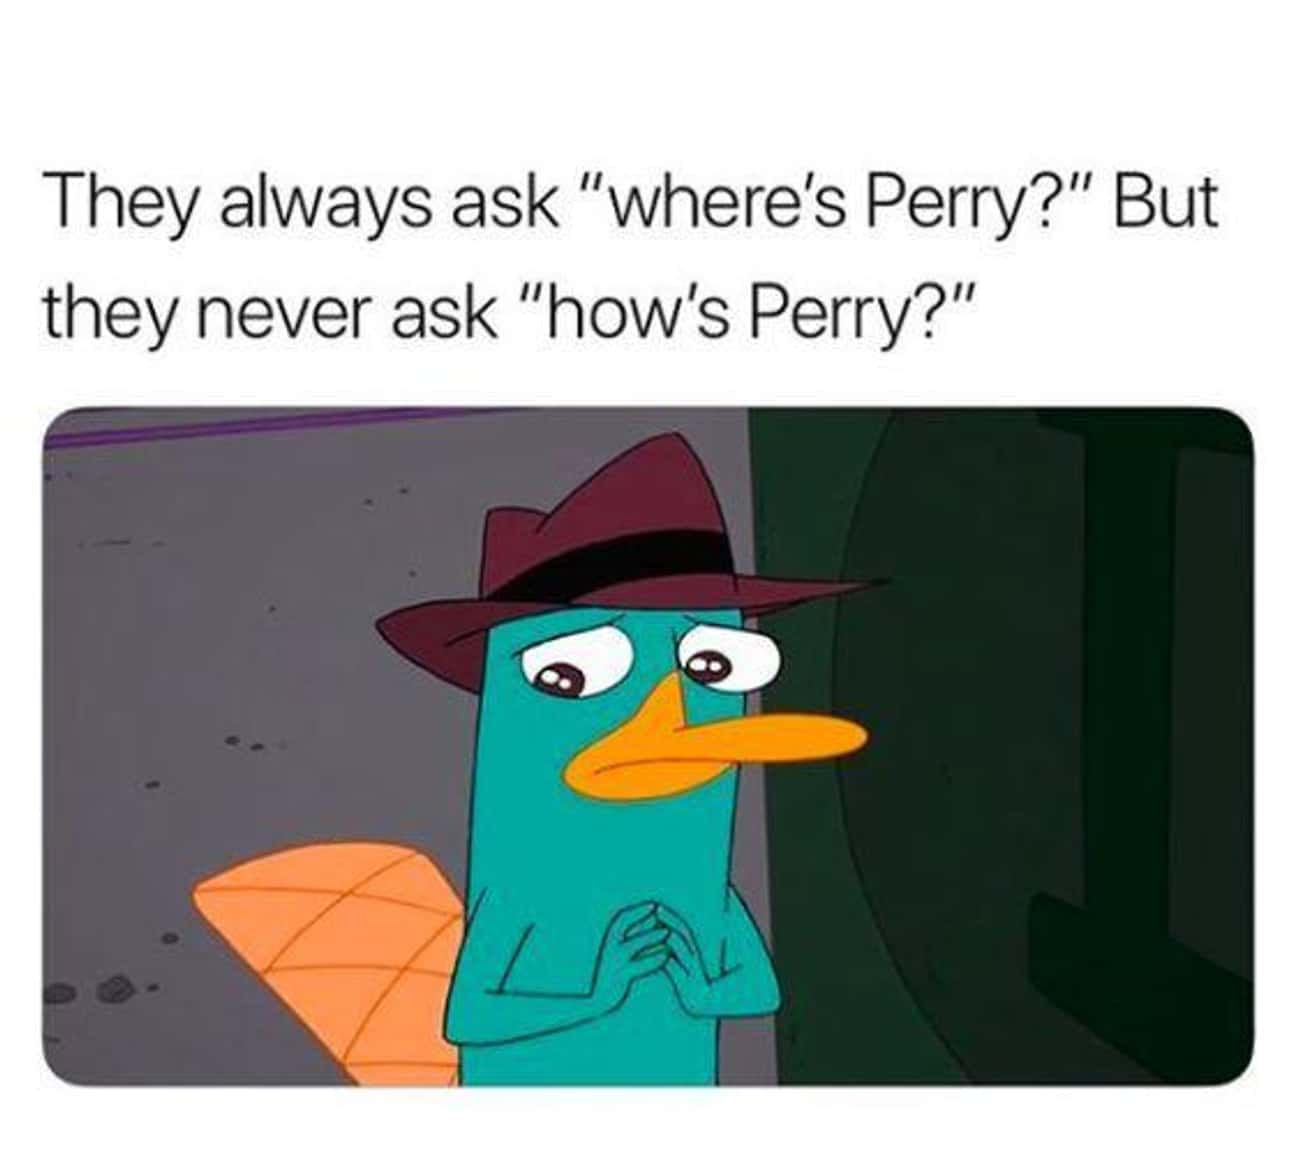 What About 'Why Perry?'